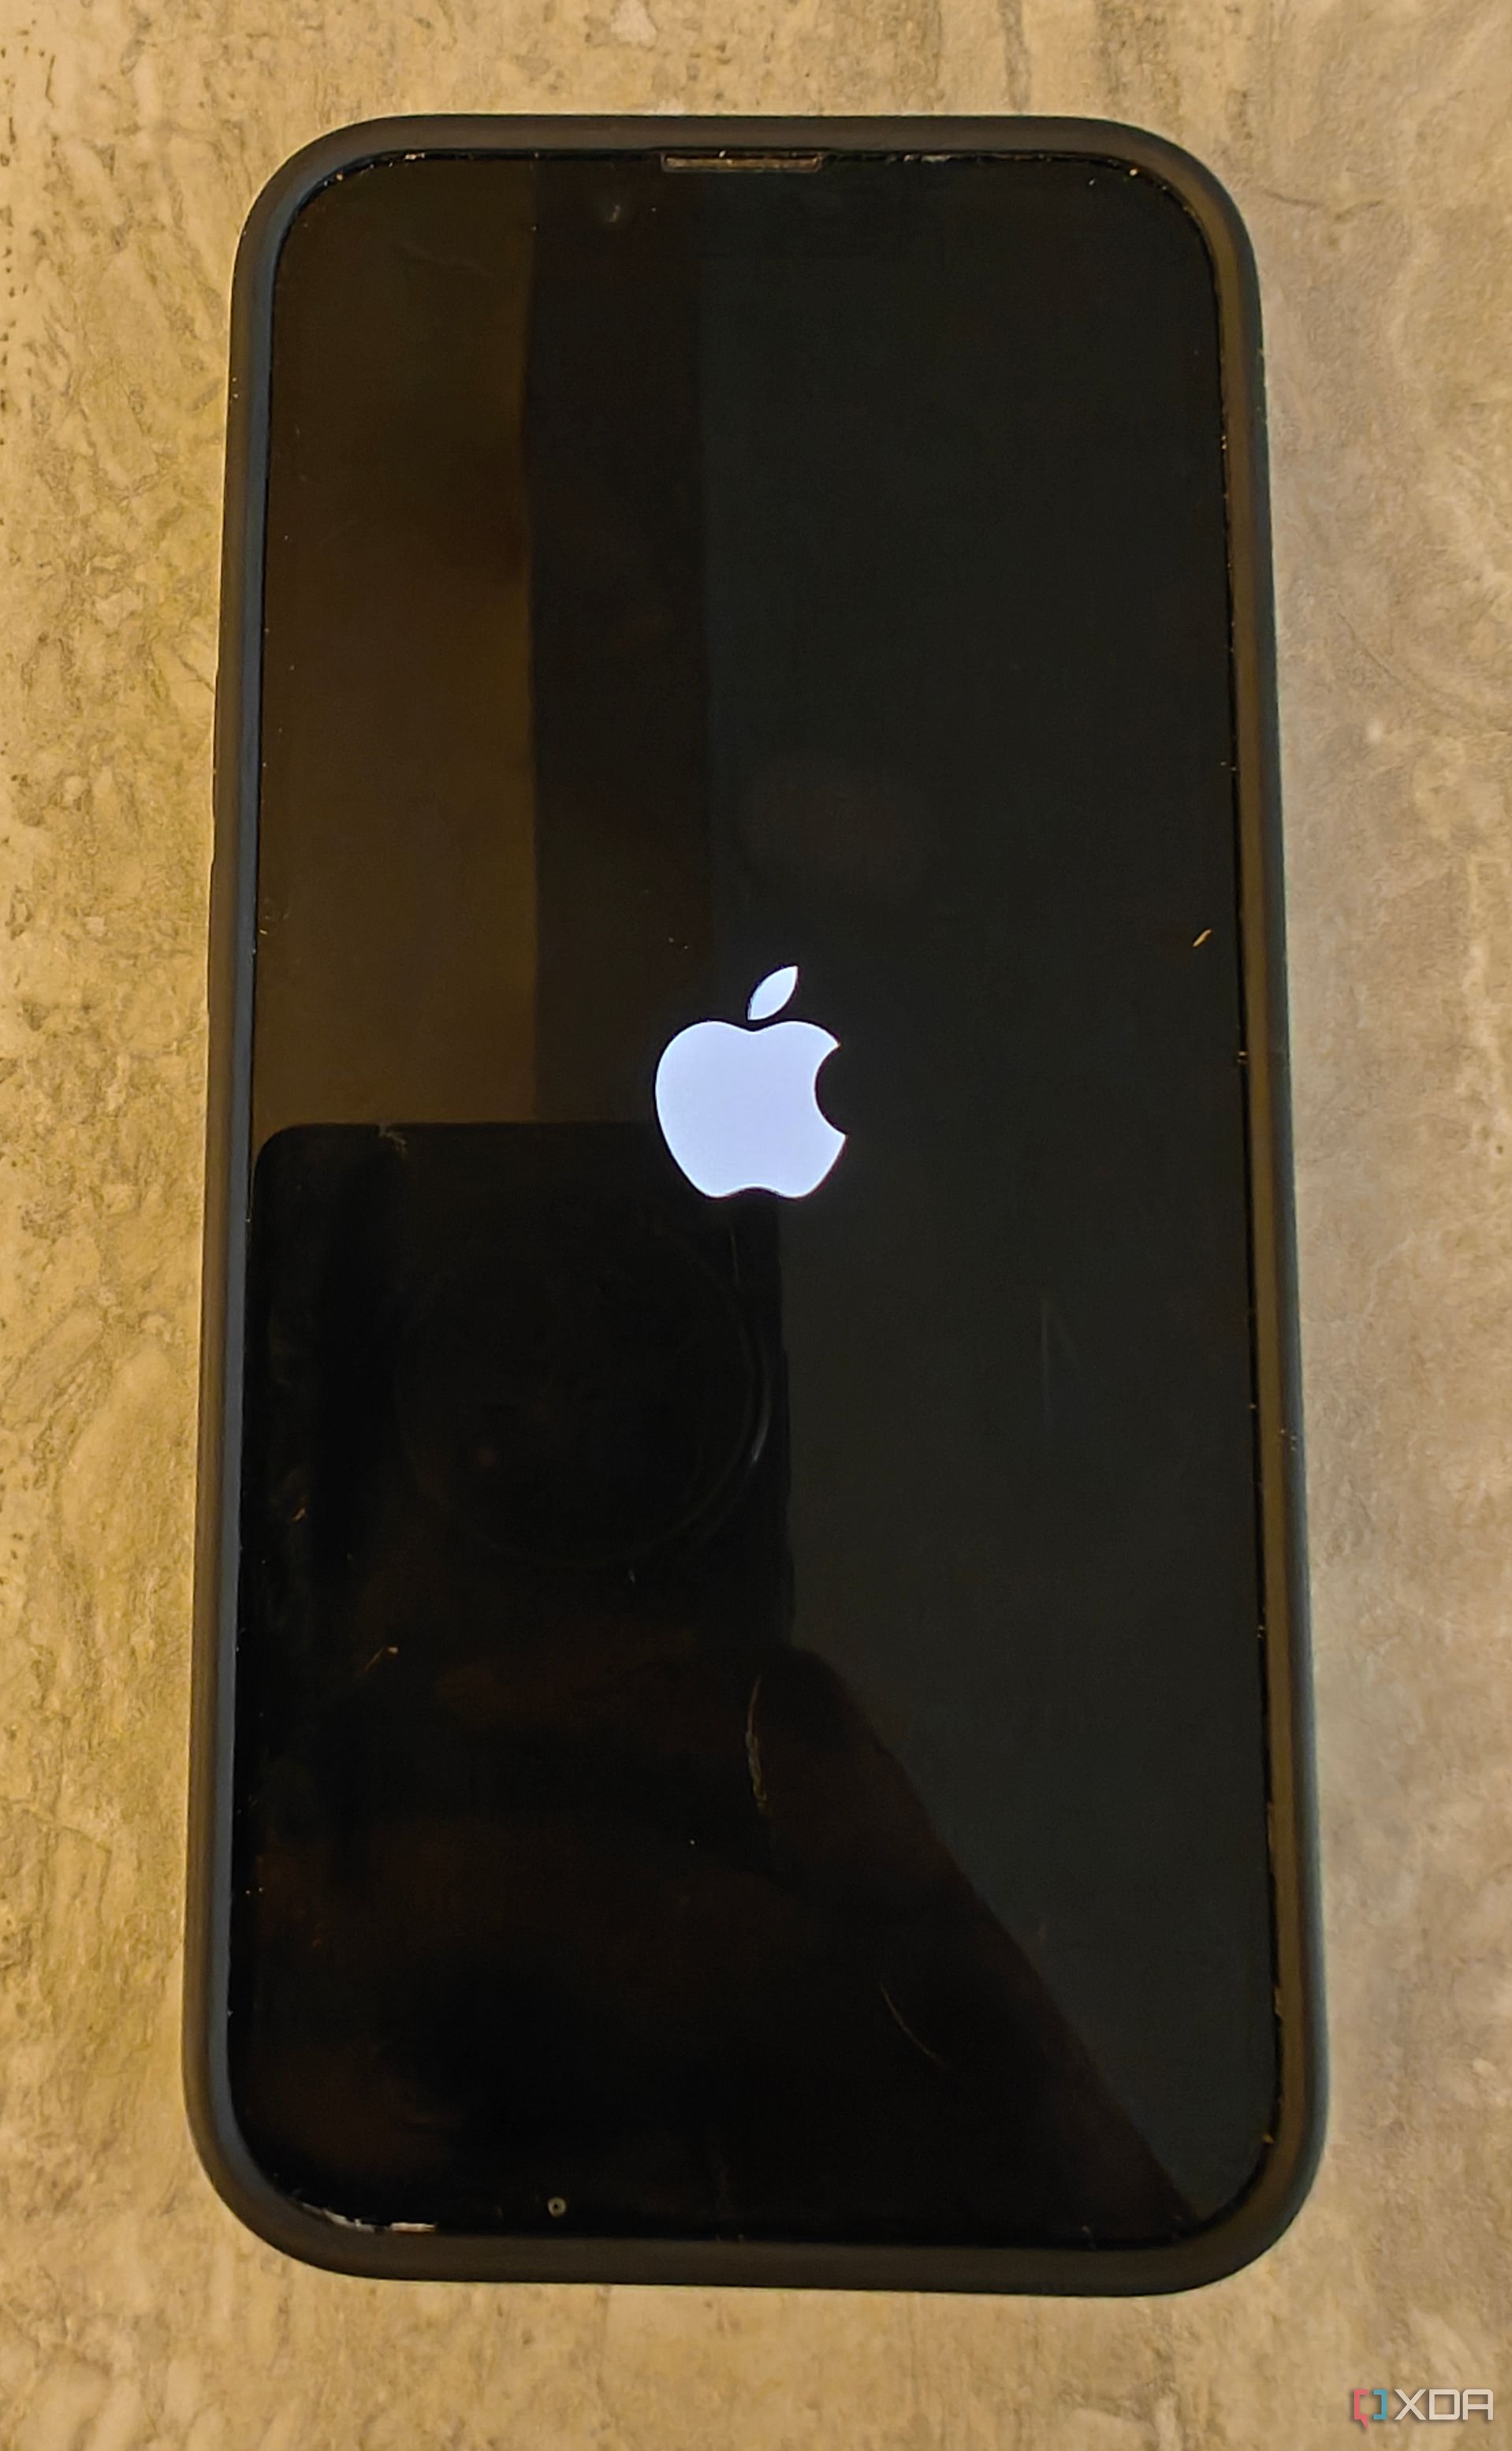 An iPhone on a table with the Apple logo on a black screen.